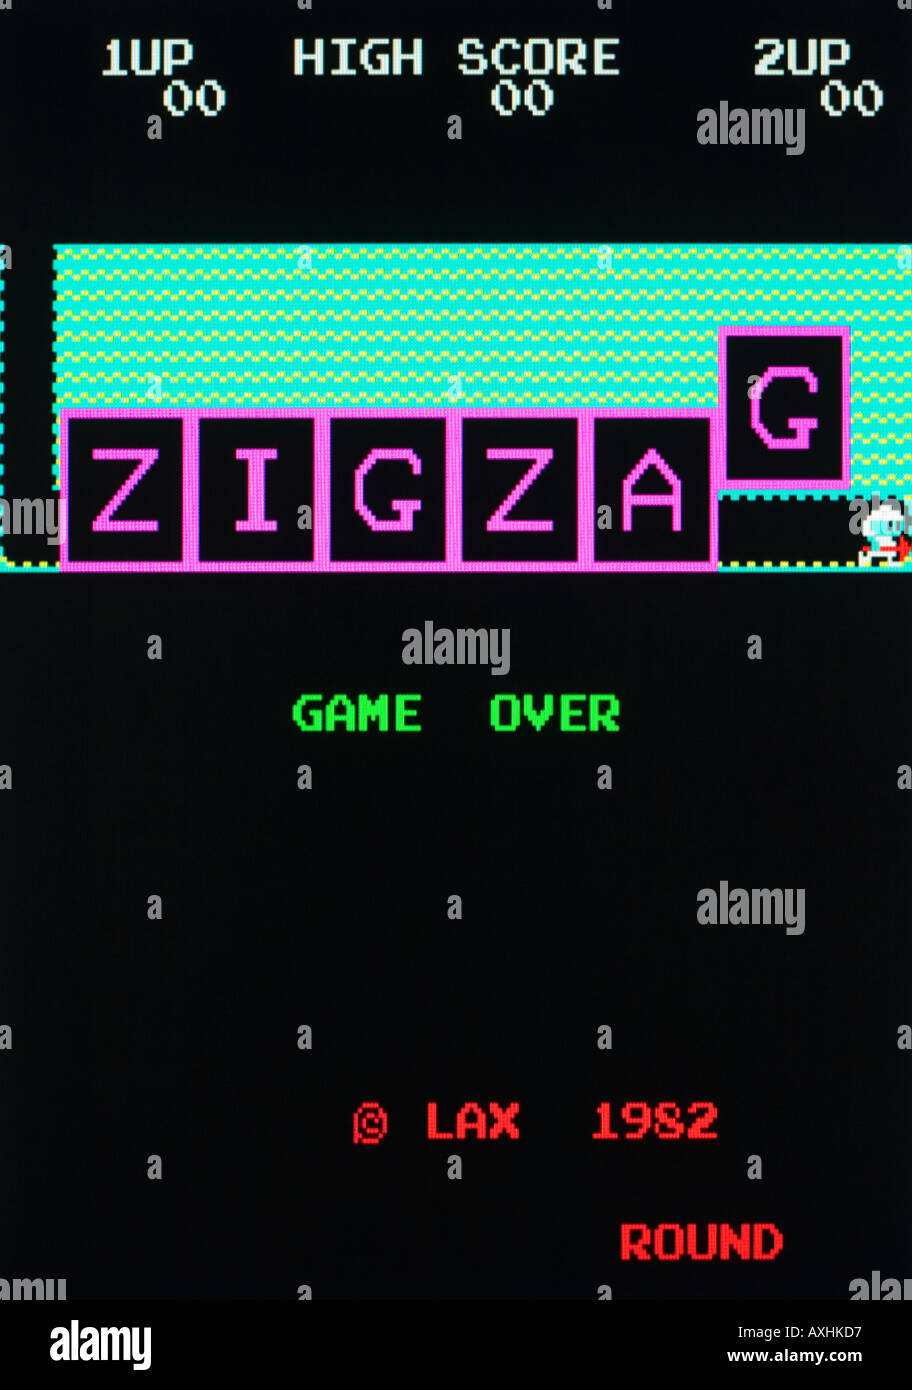 Zig Zag Lax 1982 Vintage arcade videogame screen shot - FOR EDITORIAL USE ONLY Stock Photo